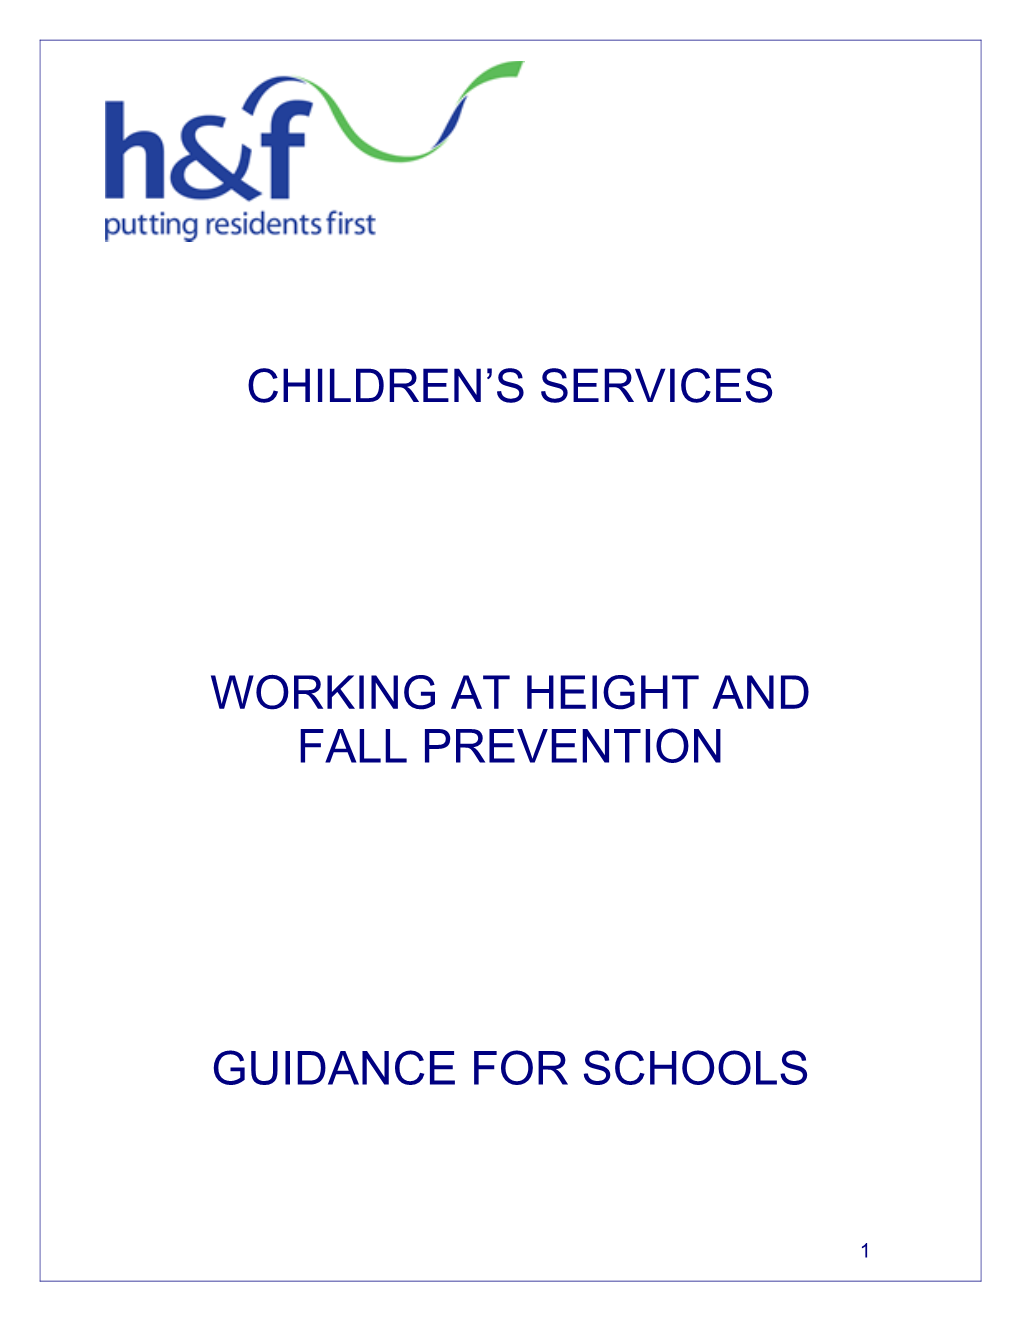 Working at Height and Fall Prevention